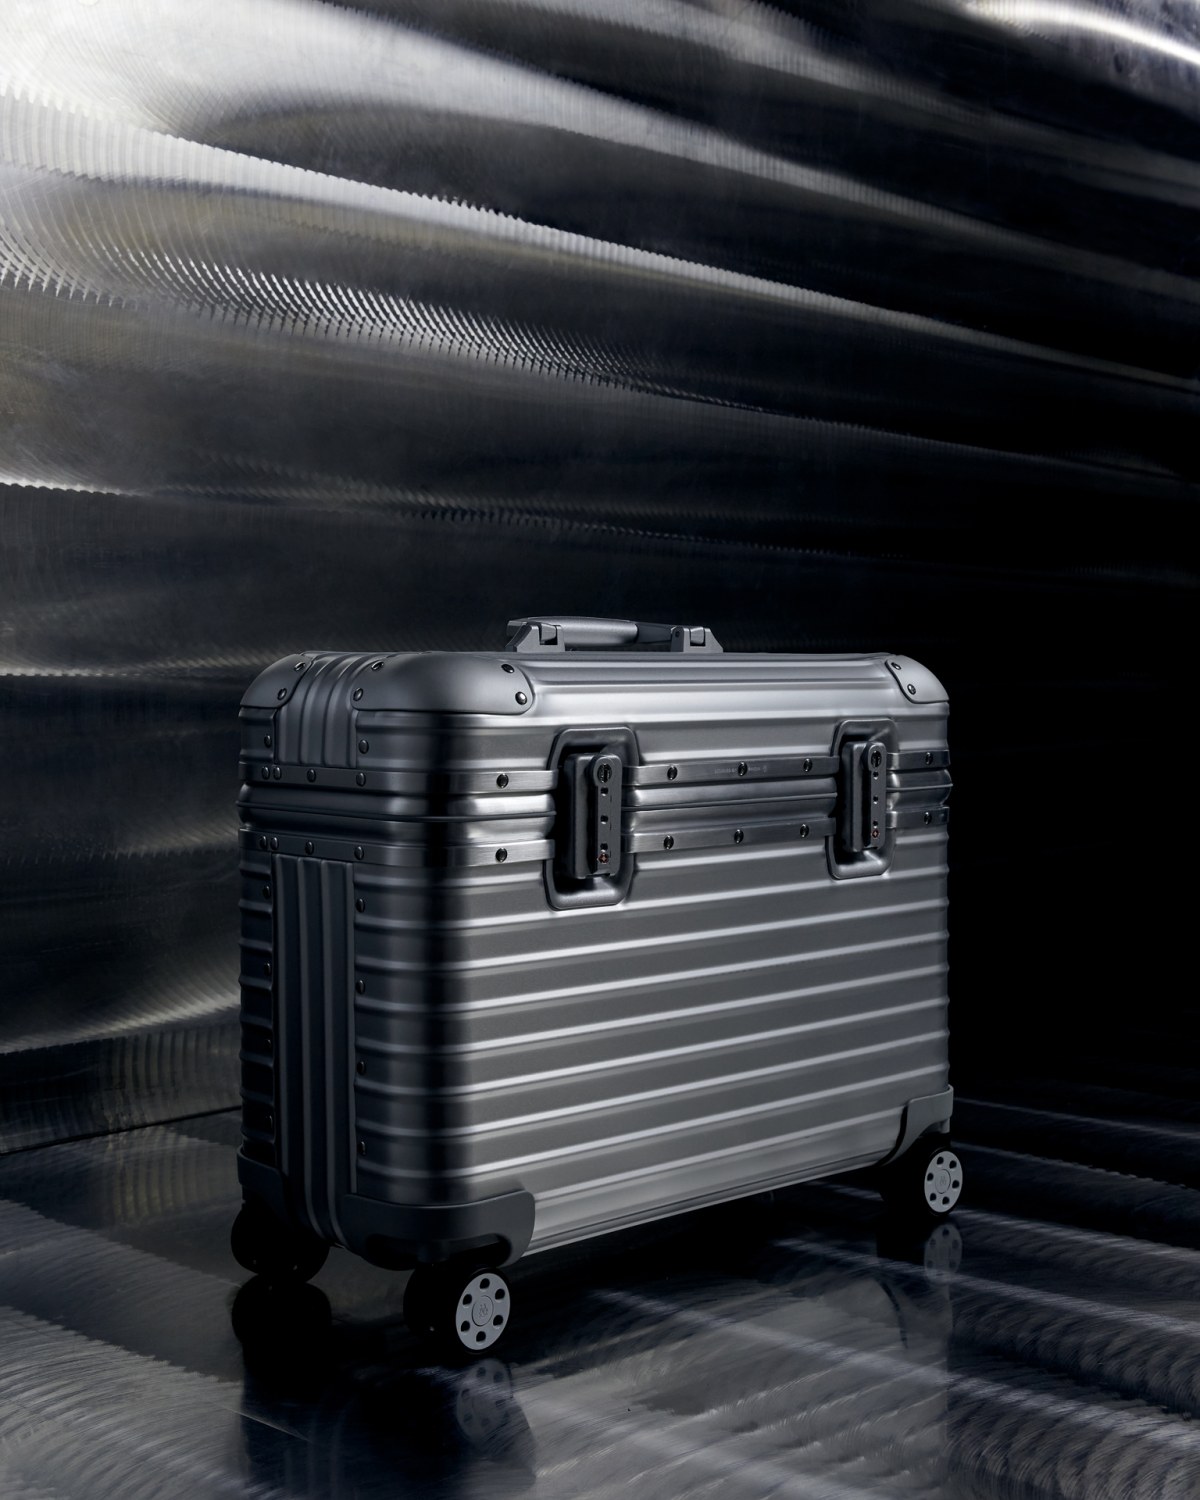 Rimowa's pilot bag is the suitcase of the summer